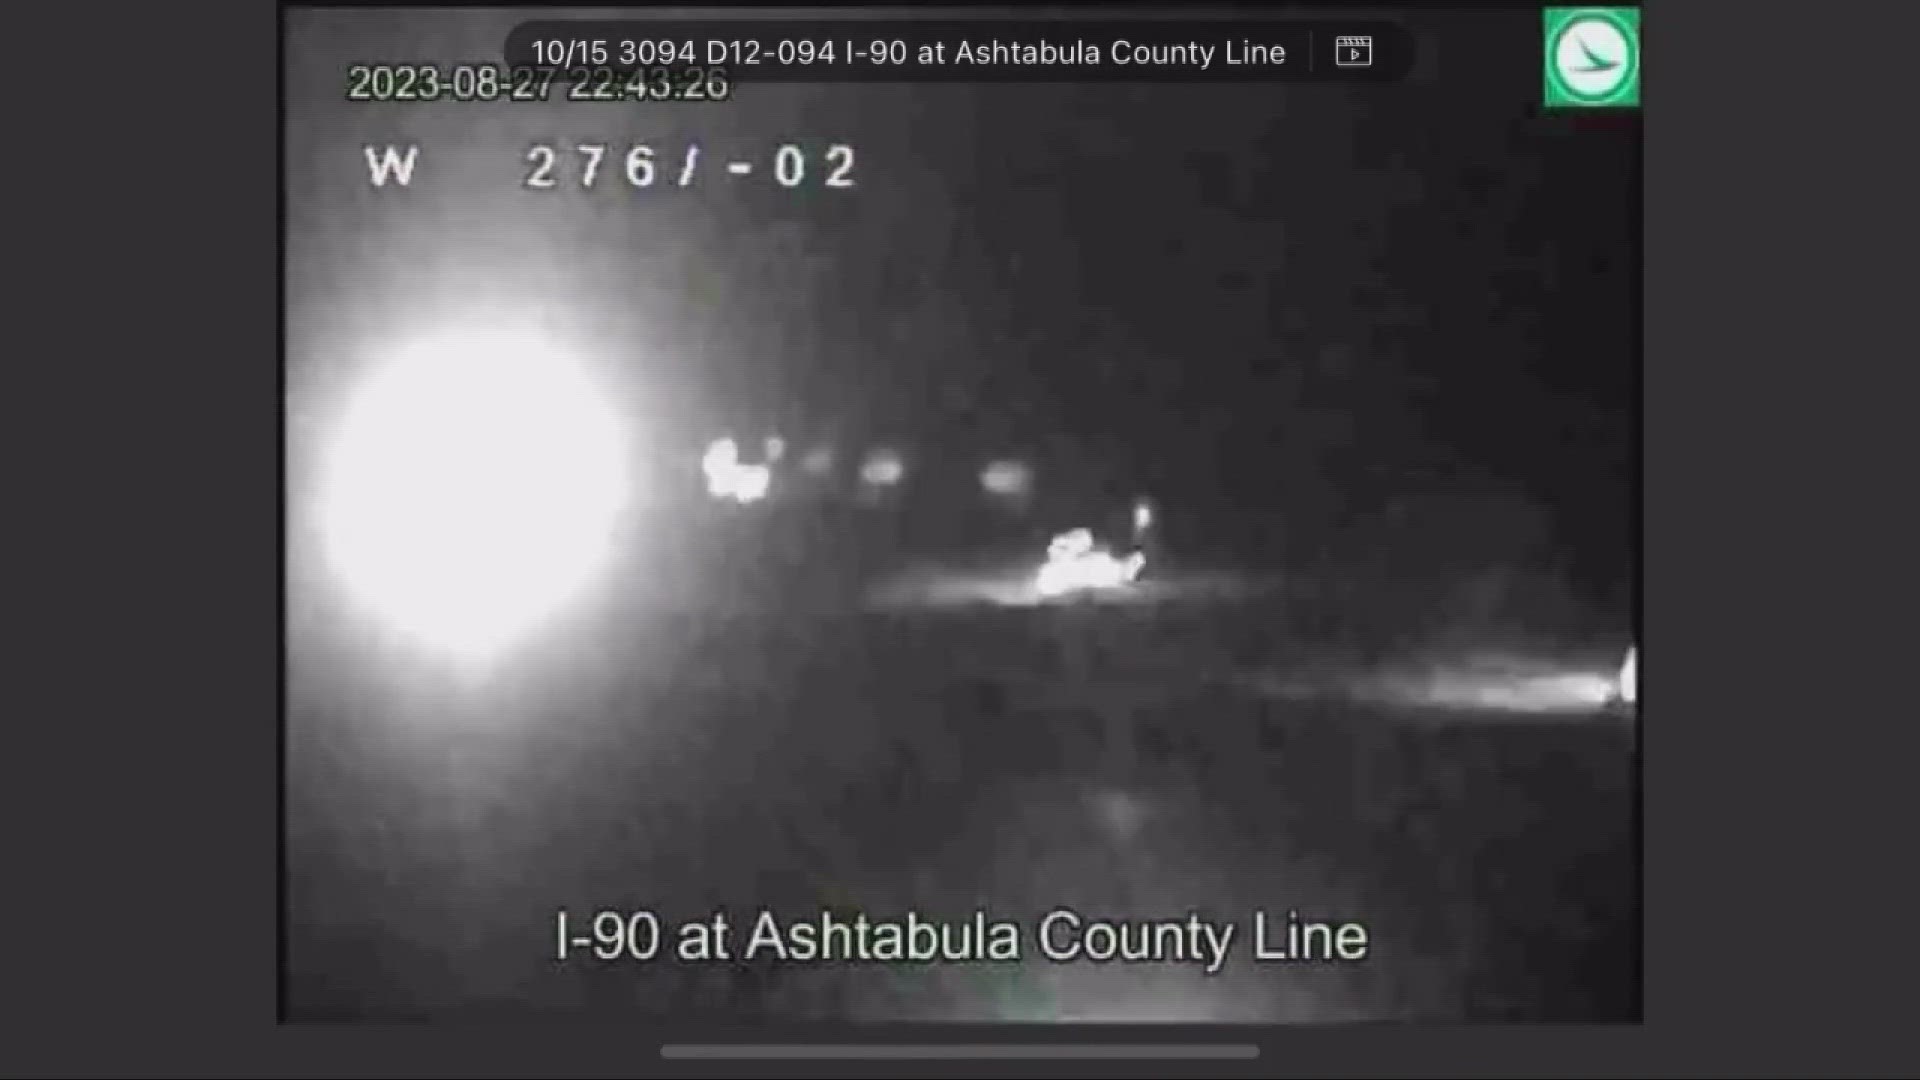 ODOT has released video from their traffic cameras that shows the moment an earthquake Madison in Northeast Ohio late Sunday night.